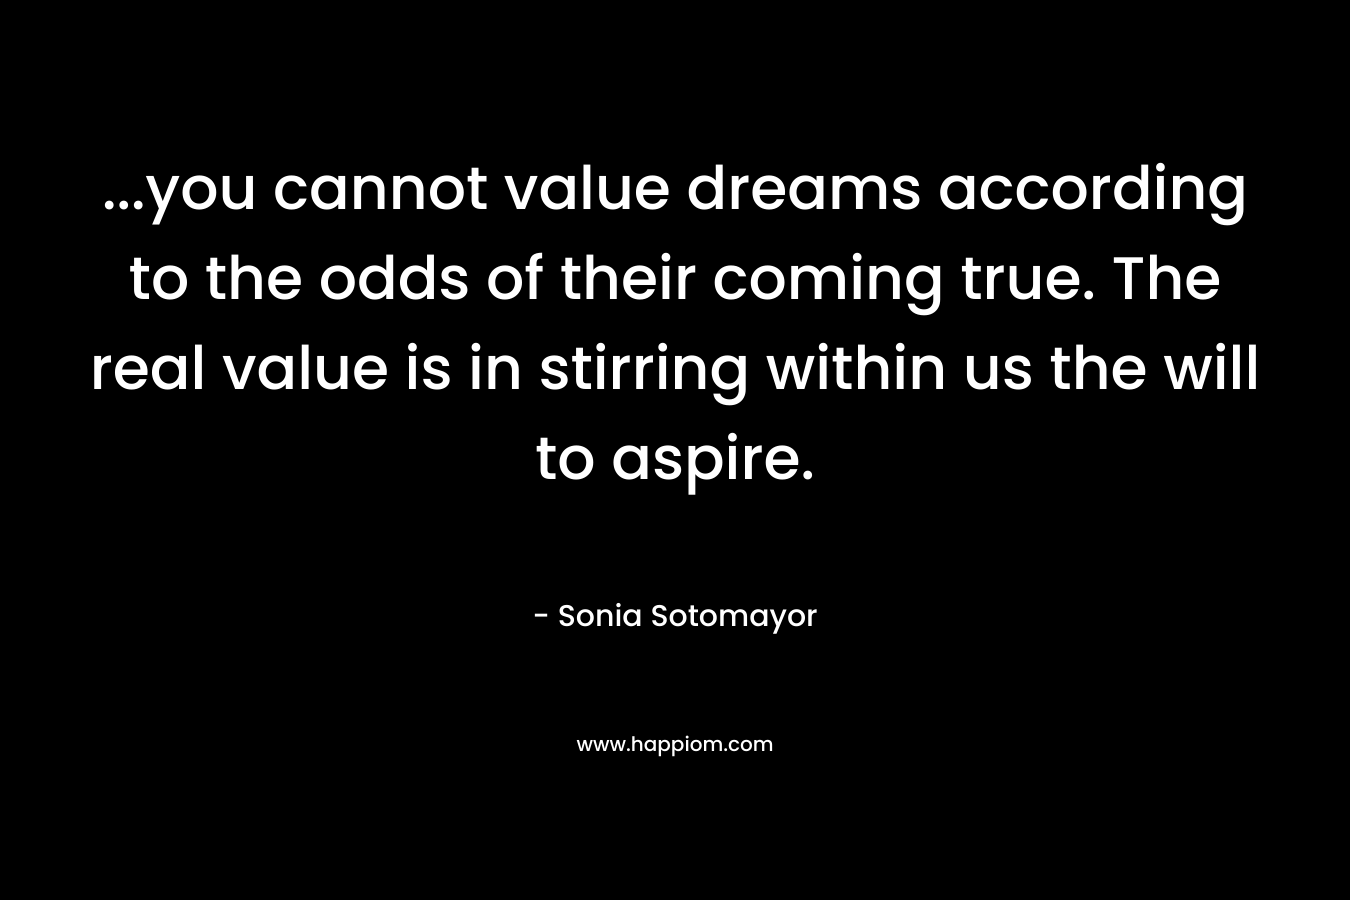 …you cannot value dreams according to the odds of their coming true. The real value is in stirring within us the will to aspire. – Sonia Sotomayor